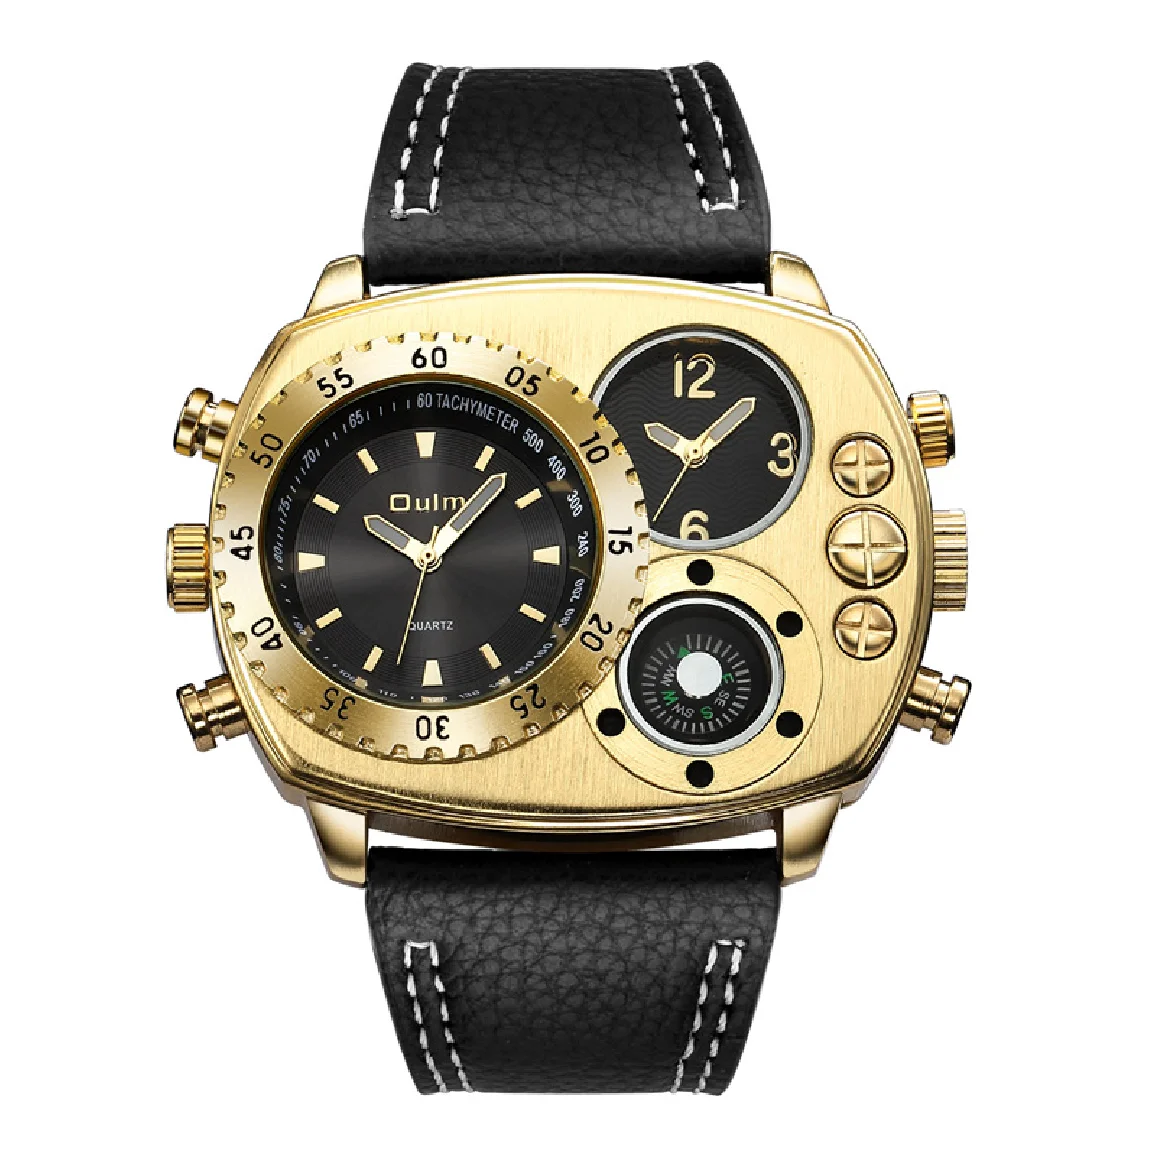 

OULM Casual Sport Watches Men Gold Top Brand Luxury Military Leather Wrist Watch Man Clock Multiple Time Zone Wristwatch